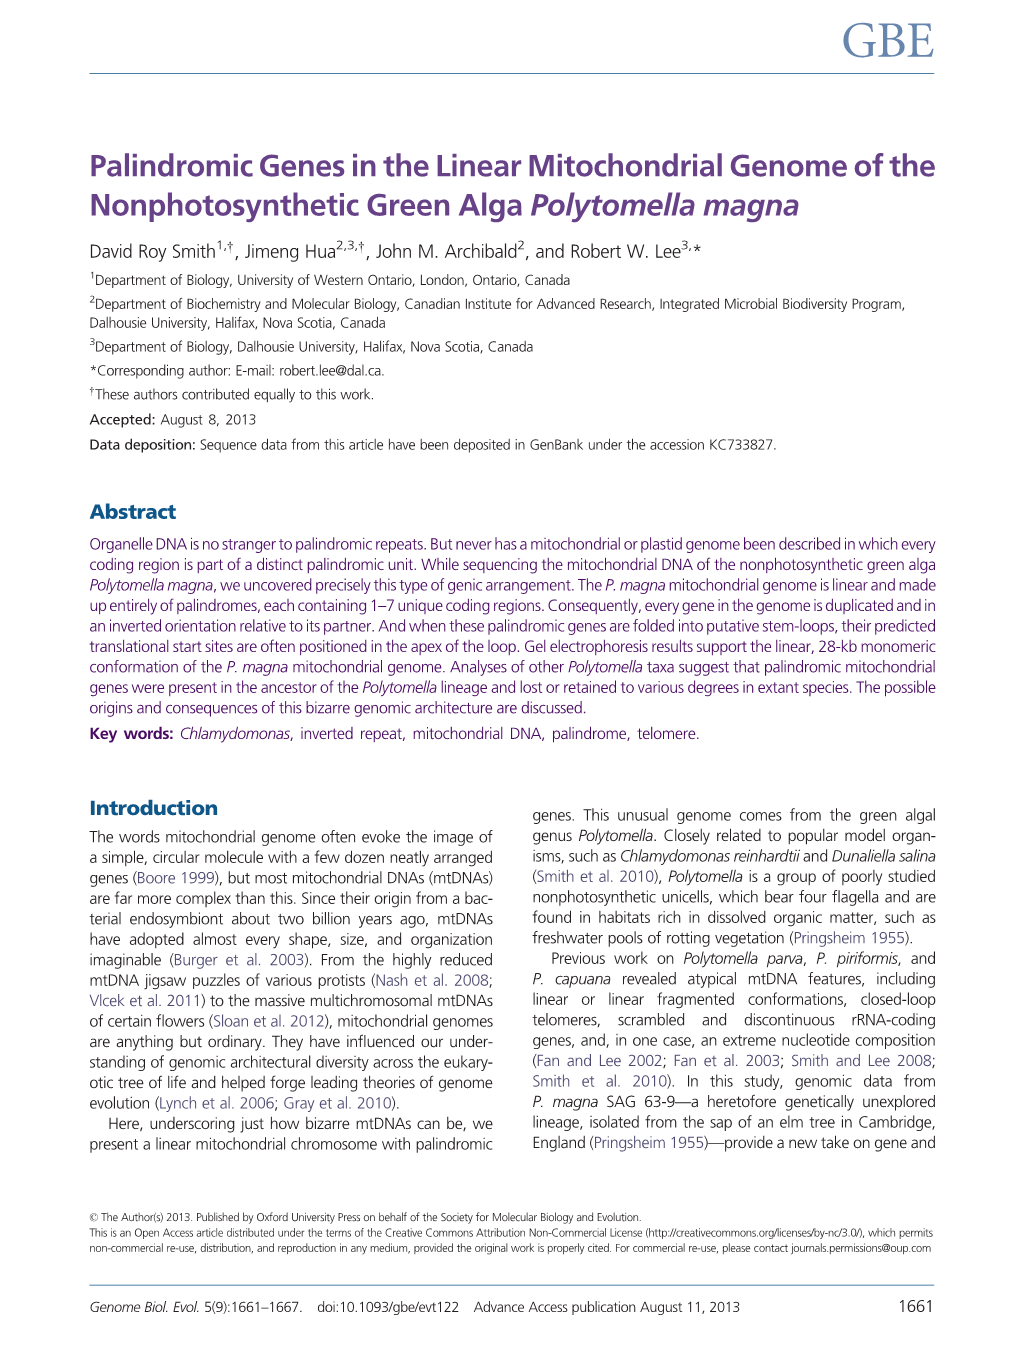 Palindromic Genes in the Linear Mitochondrial Genome of the Nonphotosynthetic Green Alga Polytomella Magna